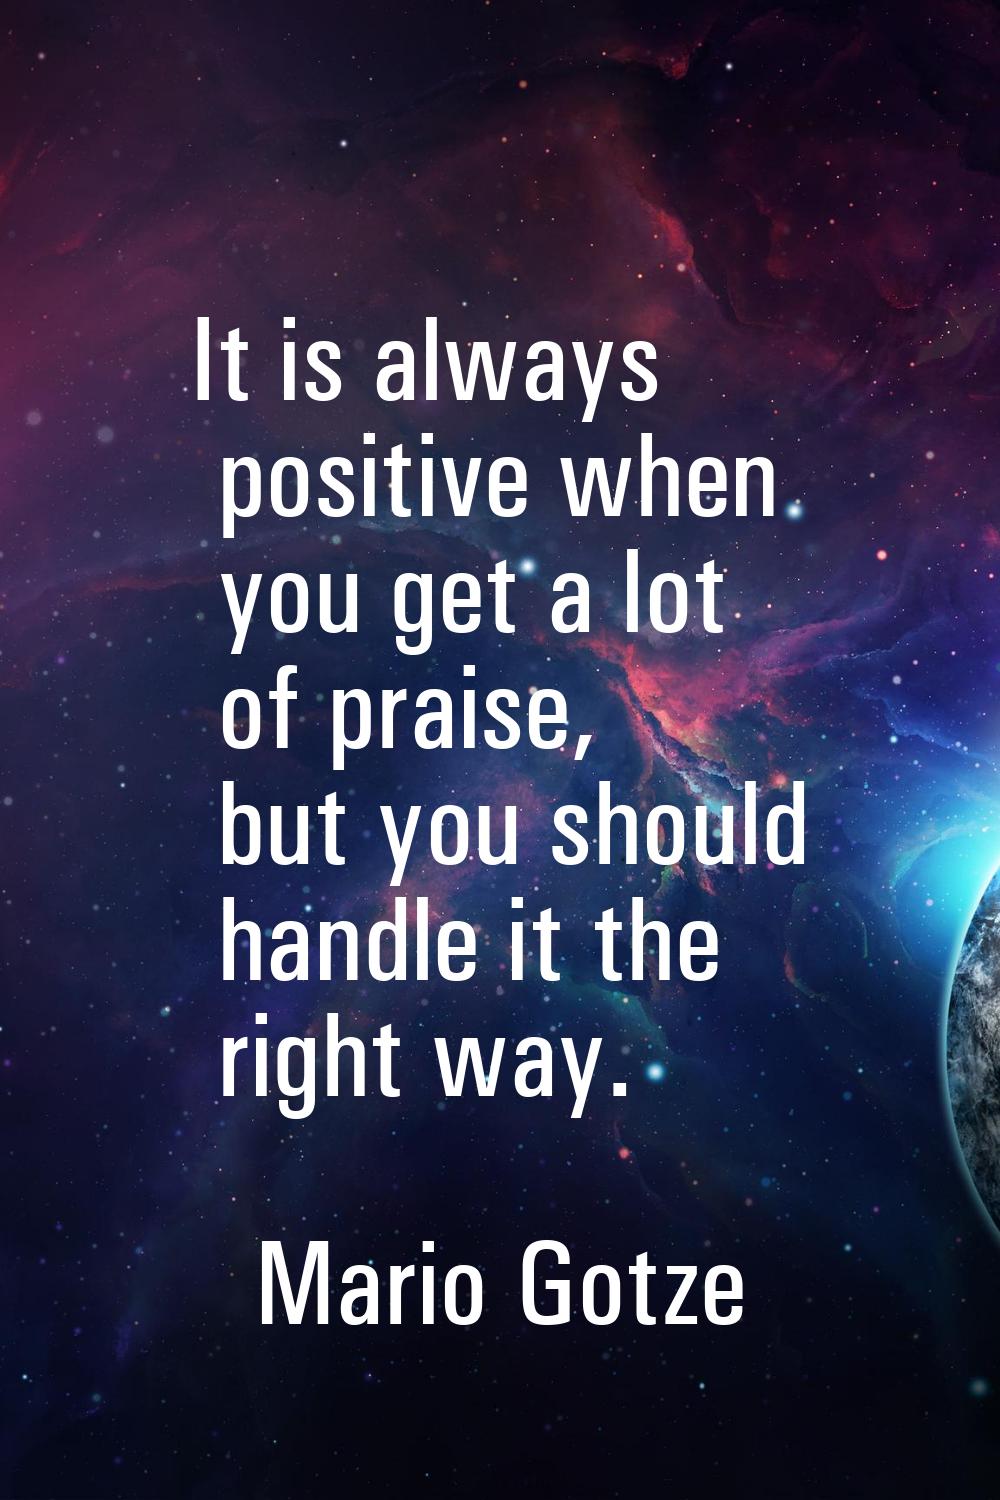 It is always positive when you get a lot of praise, but you should handle it the right way.